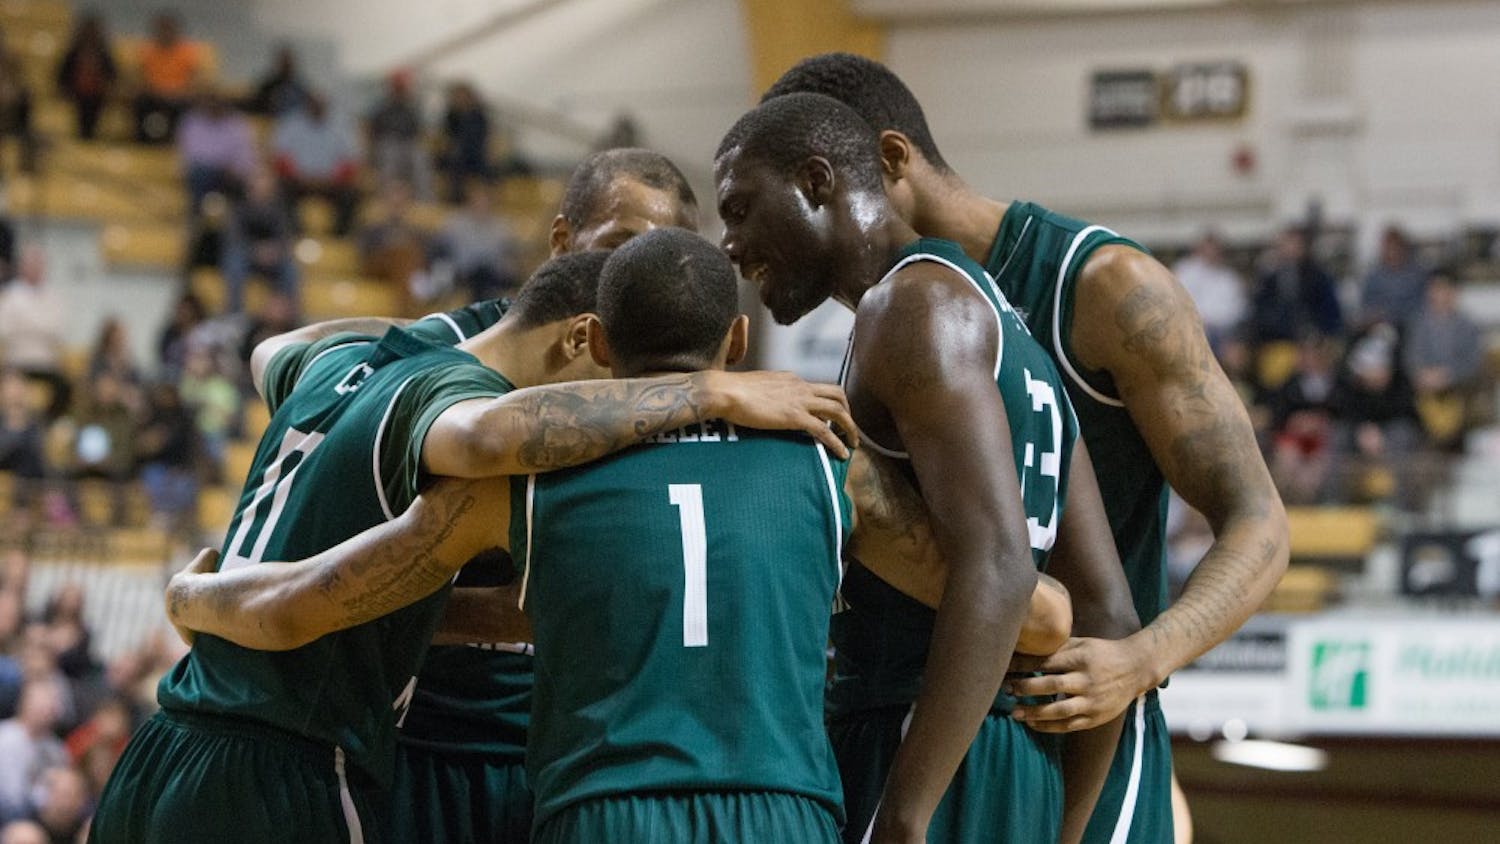 Eastern Michigan regroups before free throws in the Eagles 75-67 loss to Western Michigan Sunday afternoon in Kalamazoo.